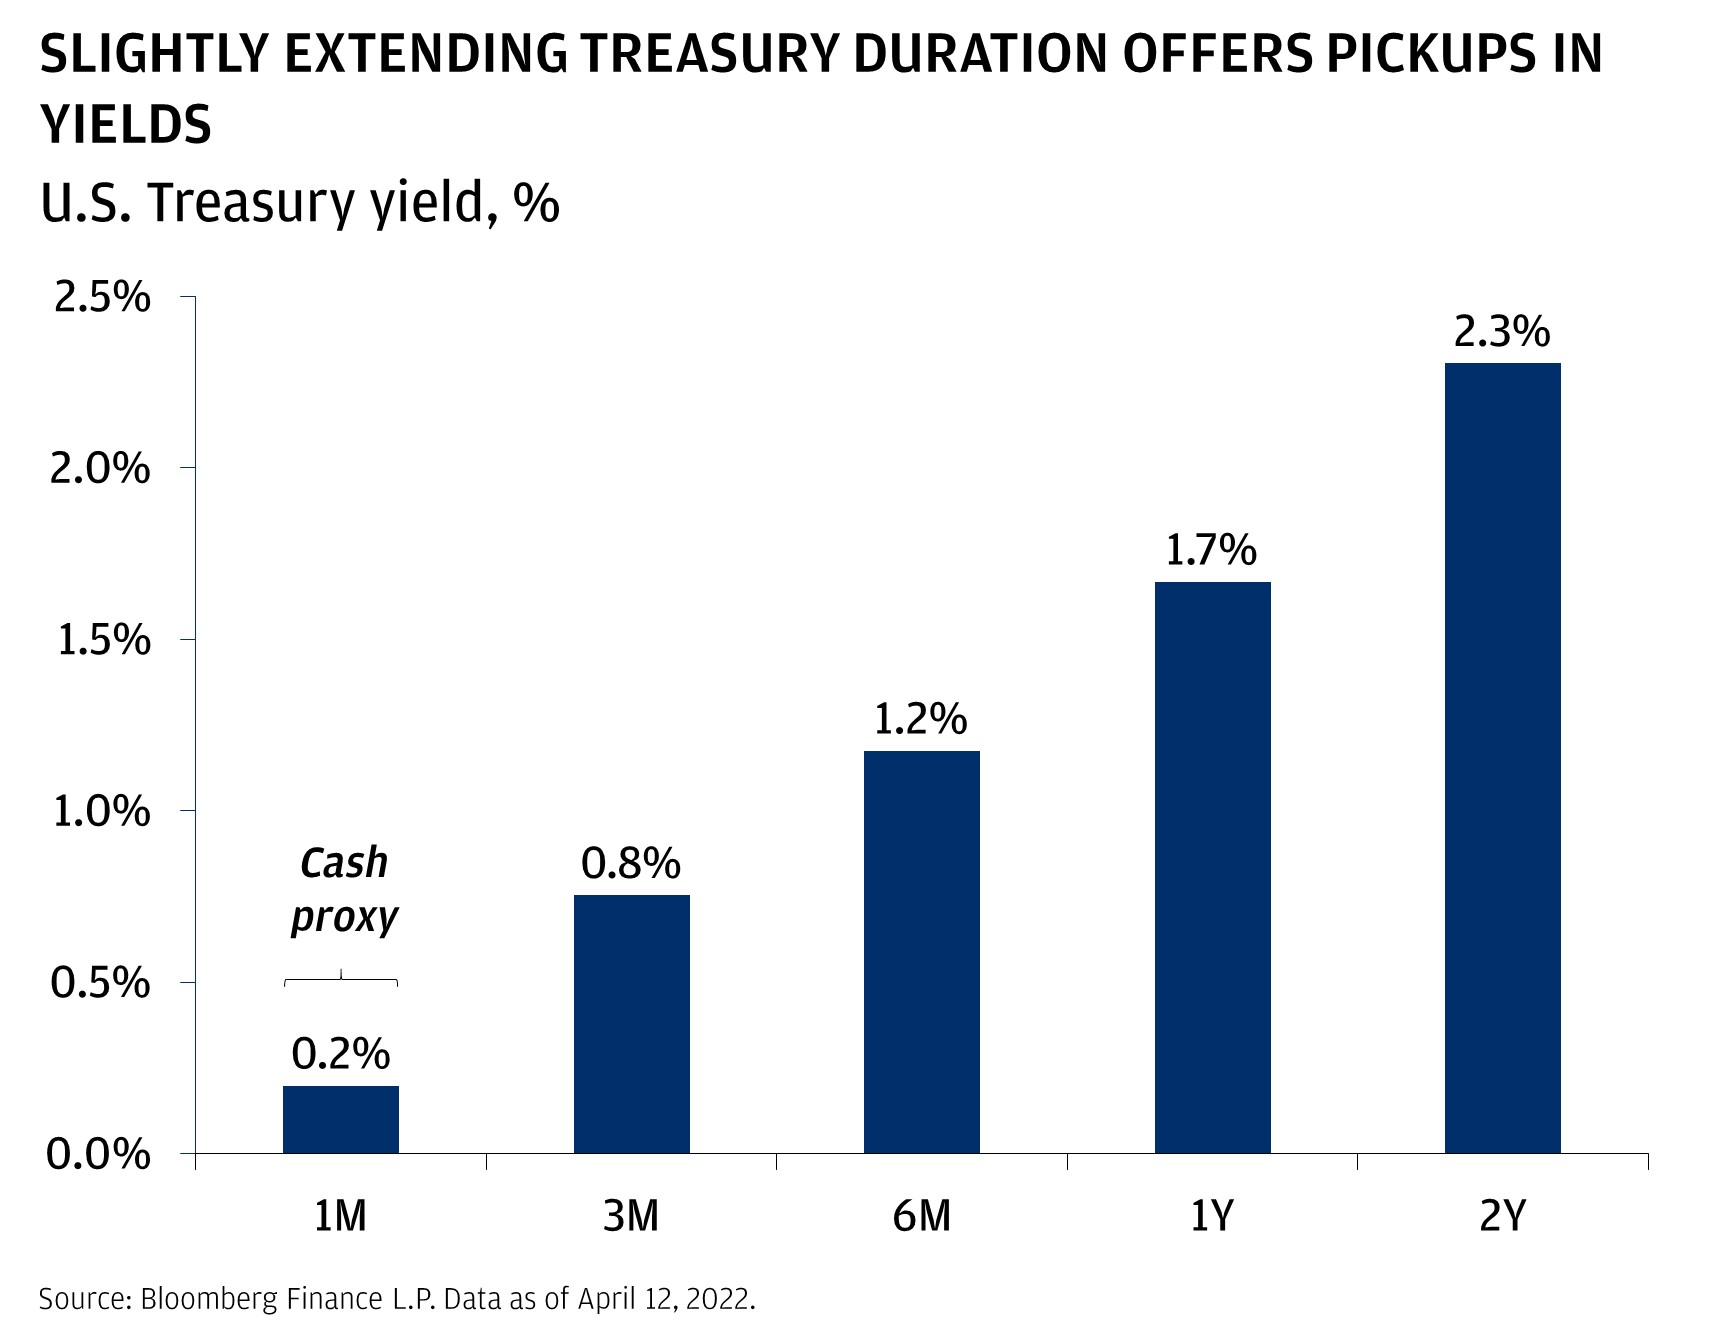 SLIGHTLY EXTENDING TREASURY DURATION OFFERS PICKUPS IN YIELDS. This chart shows the U.S. Treasury yield of the 1M, 3M, 6M, 1Y and 2Y: 0.2%, 0.8%, 1.2%, 1.7% and 2.3%, respectively.